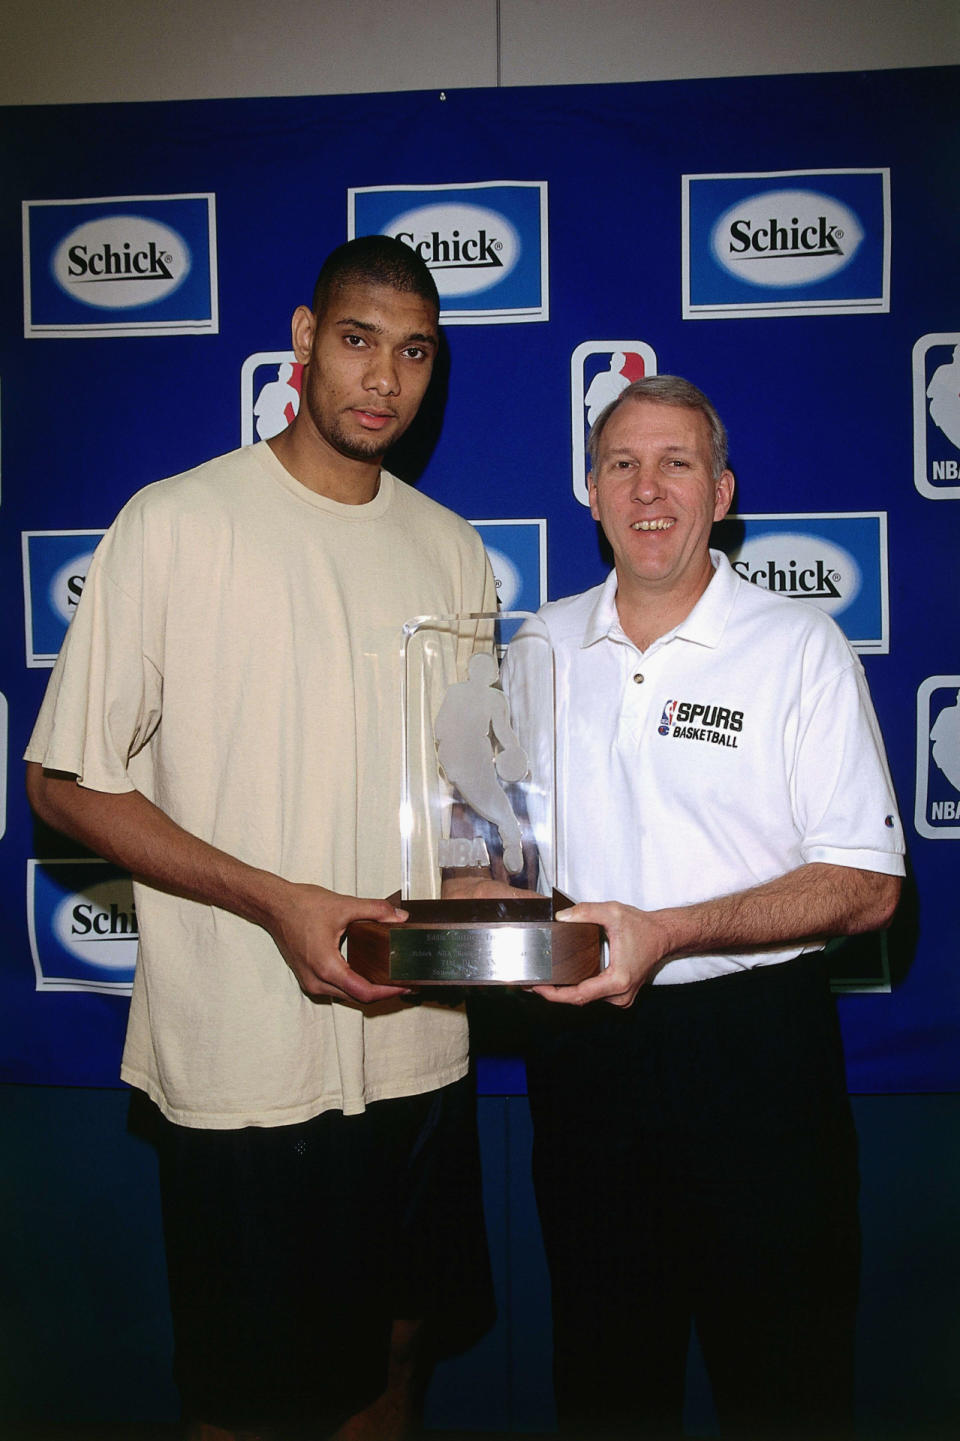 <p>1998: Tim Duncan #21 of the San Antonio Spurs poses for a portrait with Gregg Popovich during the Rookie of the Year press conference on April 27, 1998 in San Antonio, Texas.<br></p>